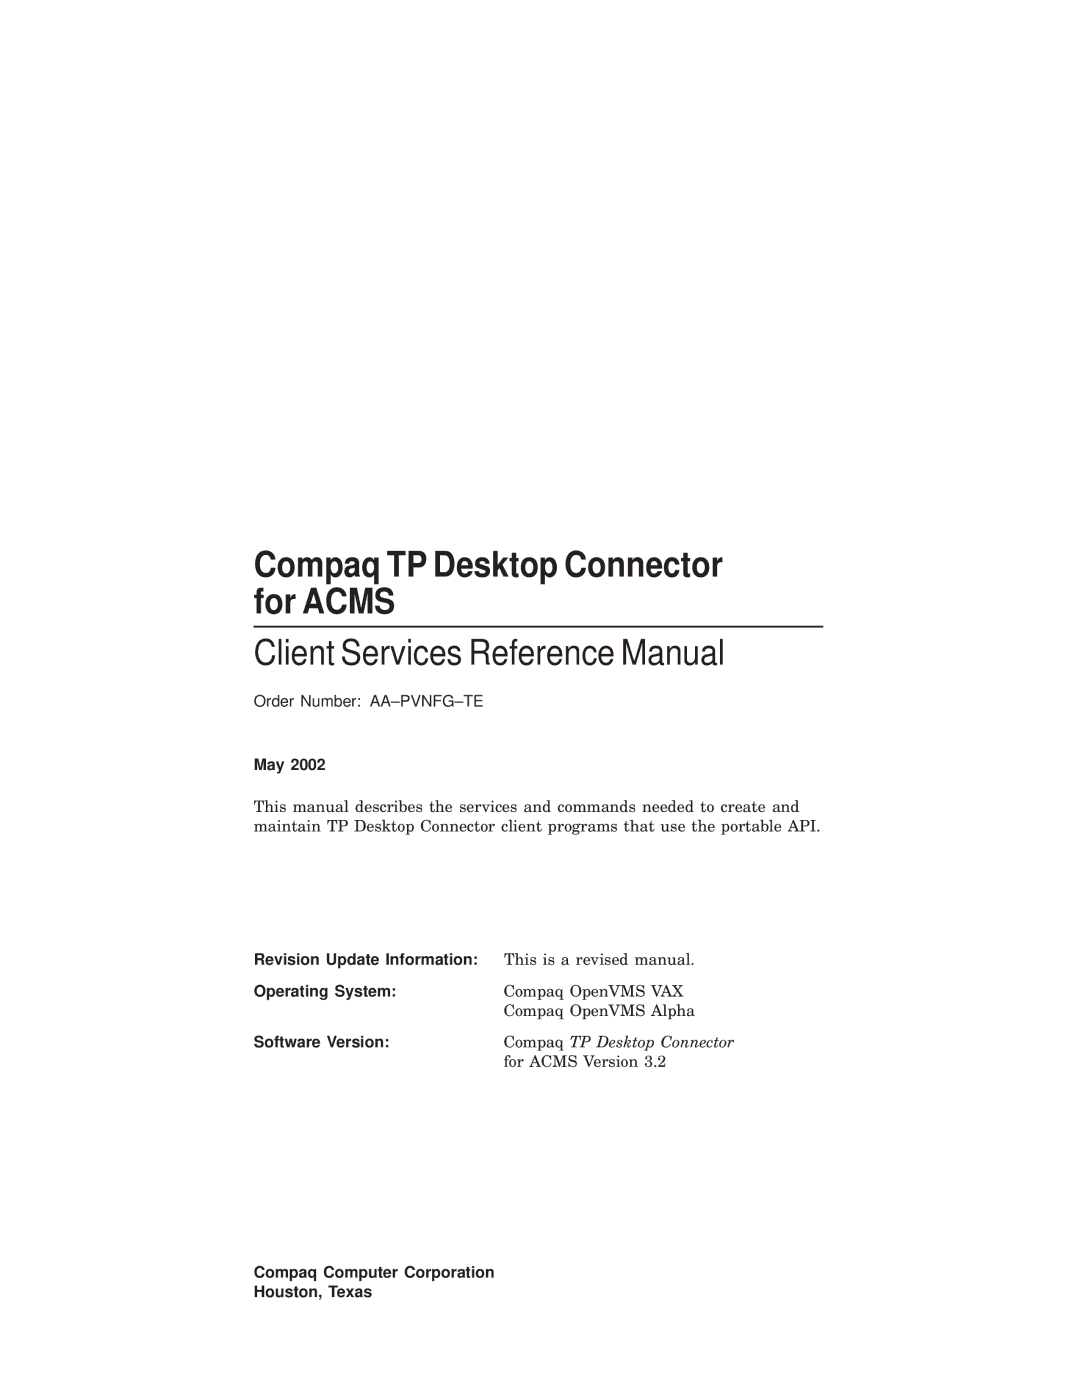 Compaq AAPVNFGTE manual May, Revision Update Information, Operating System, Software Version 